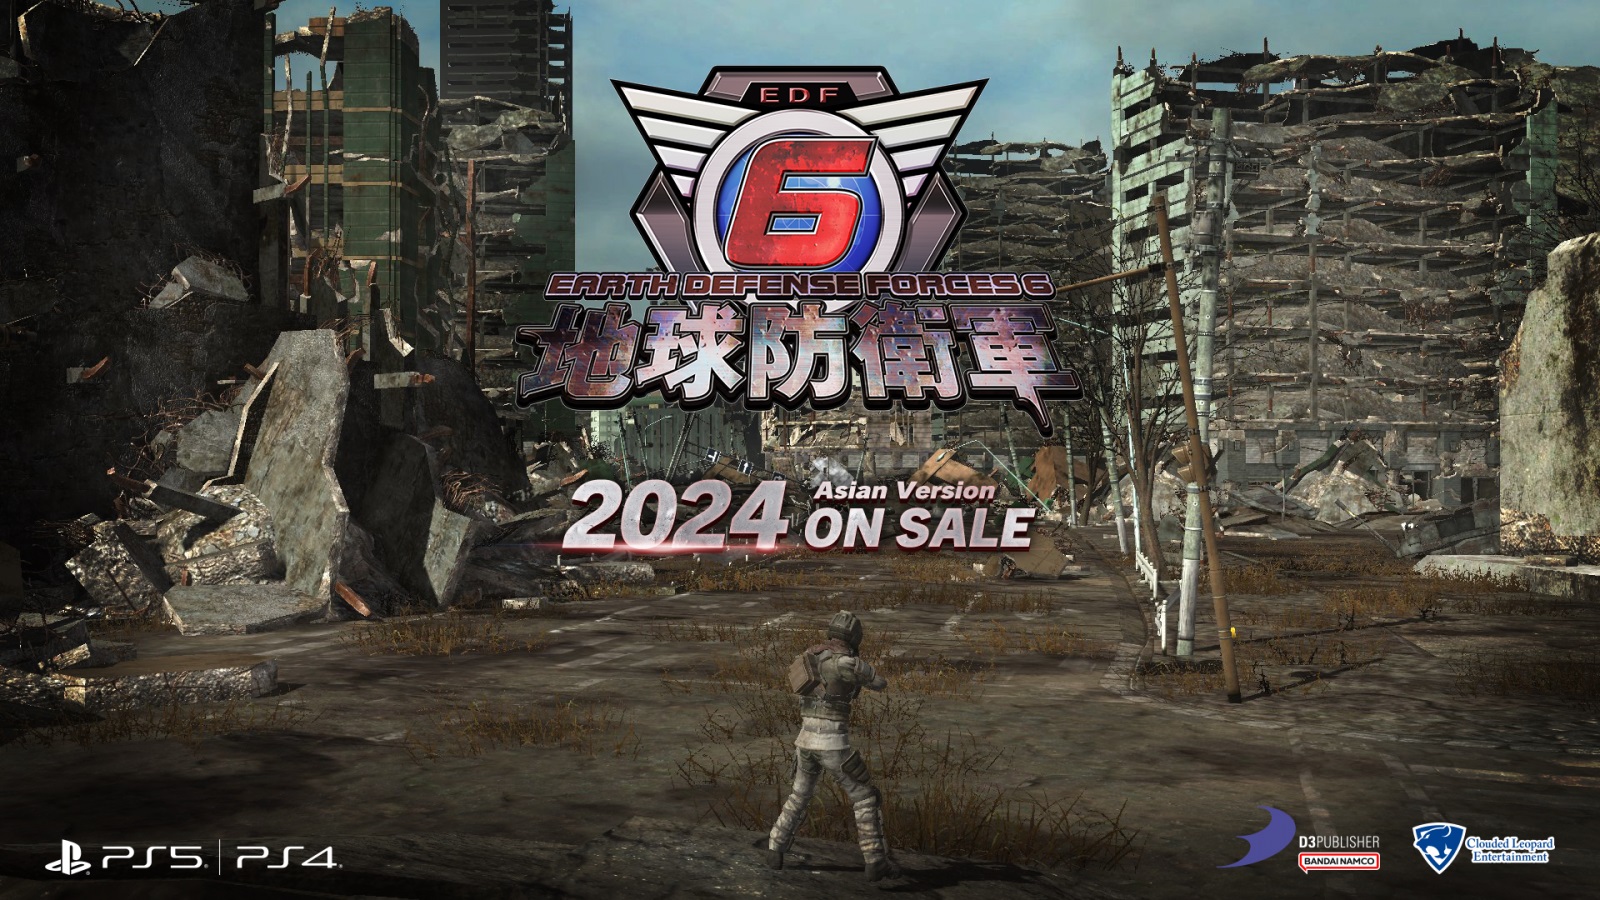 Earth Defense Force 6 is getting an Asian/English version in 2024